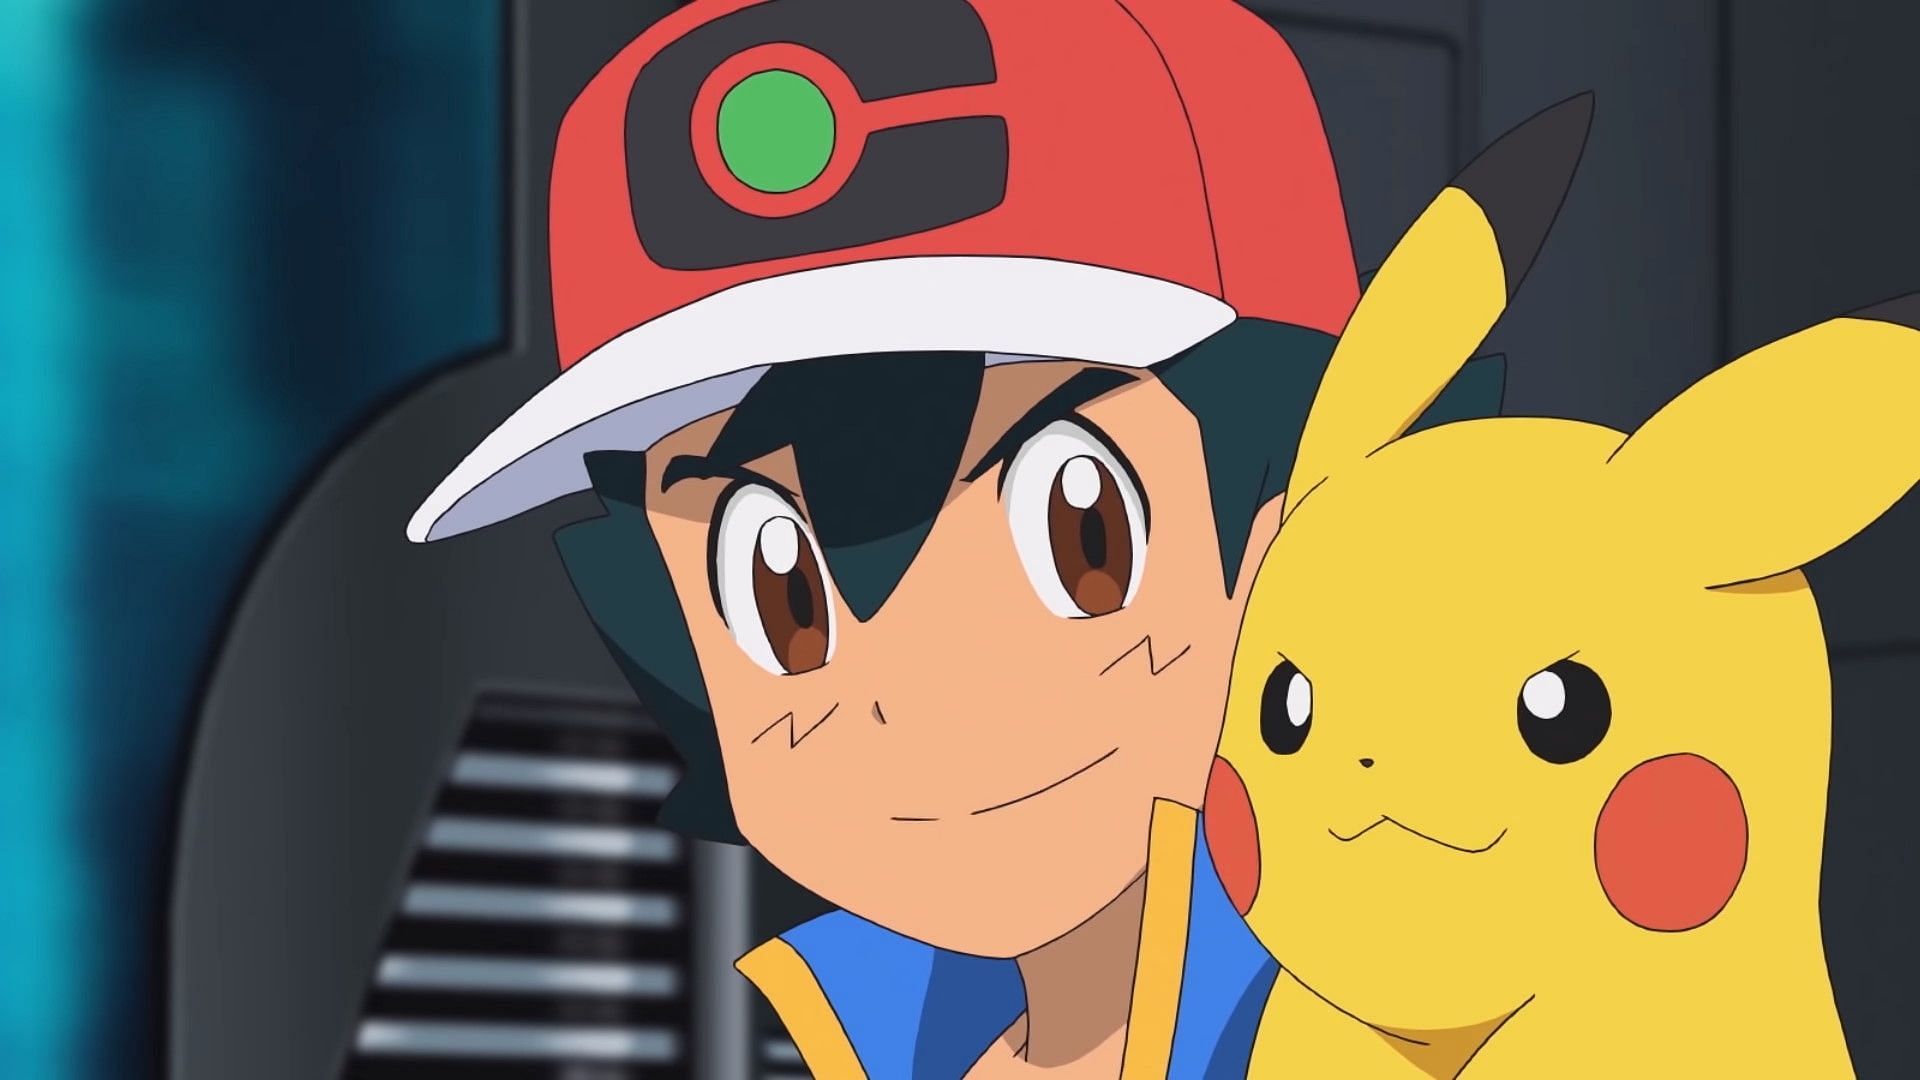 How Old Is Ash In Pokemon Journeys? Explained